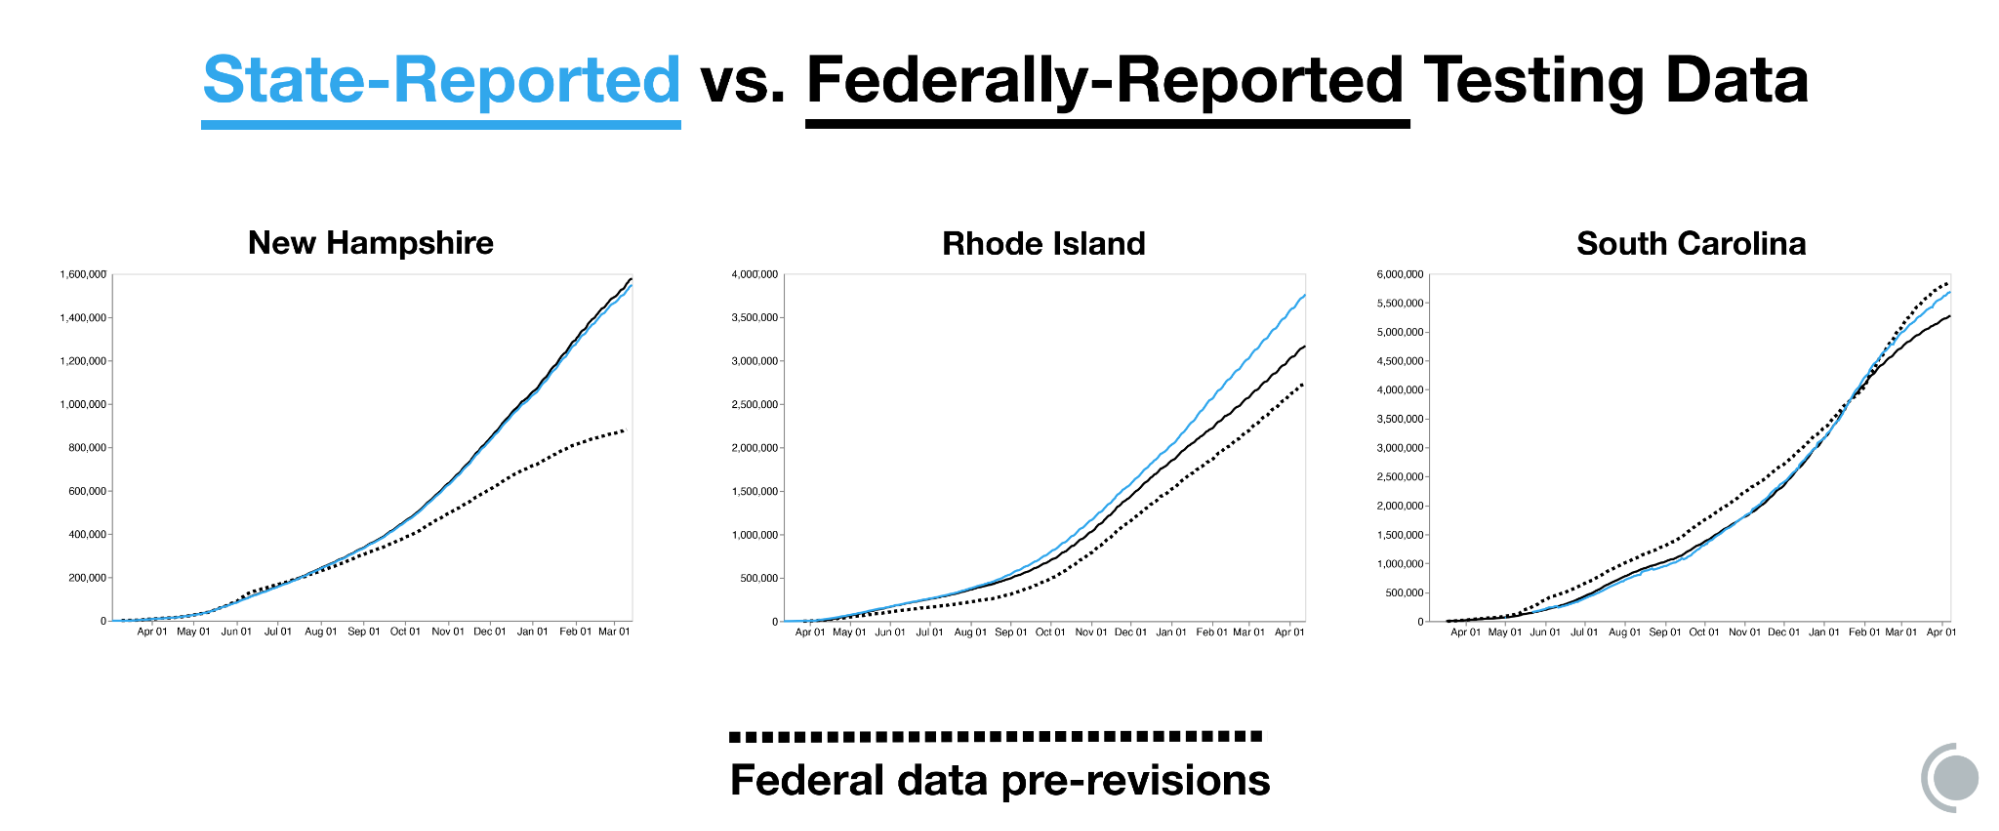 Three graphs depict historical testing data curves before and after revisions in New Hampshire, Rhode Island, and South Carolina. The graphs also show state historical data. New Hampshire's federal data perfectly matches state data after the revisions. Rhode Island's federal data was shifted upwards, but is still lower than state data, likely due to antigen testing. South Carolina's federal data, which used to be higher than the state data, now matches perfectly in the historical data but is a bit lower than state data in recent weeks.